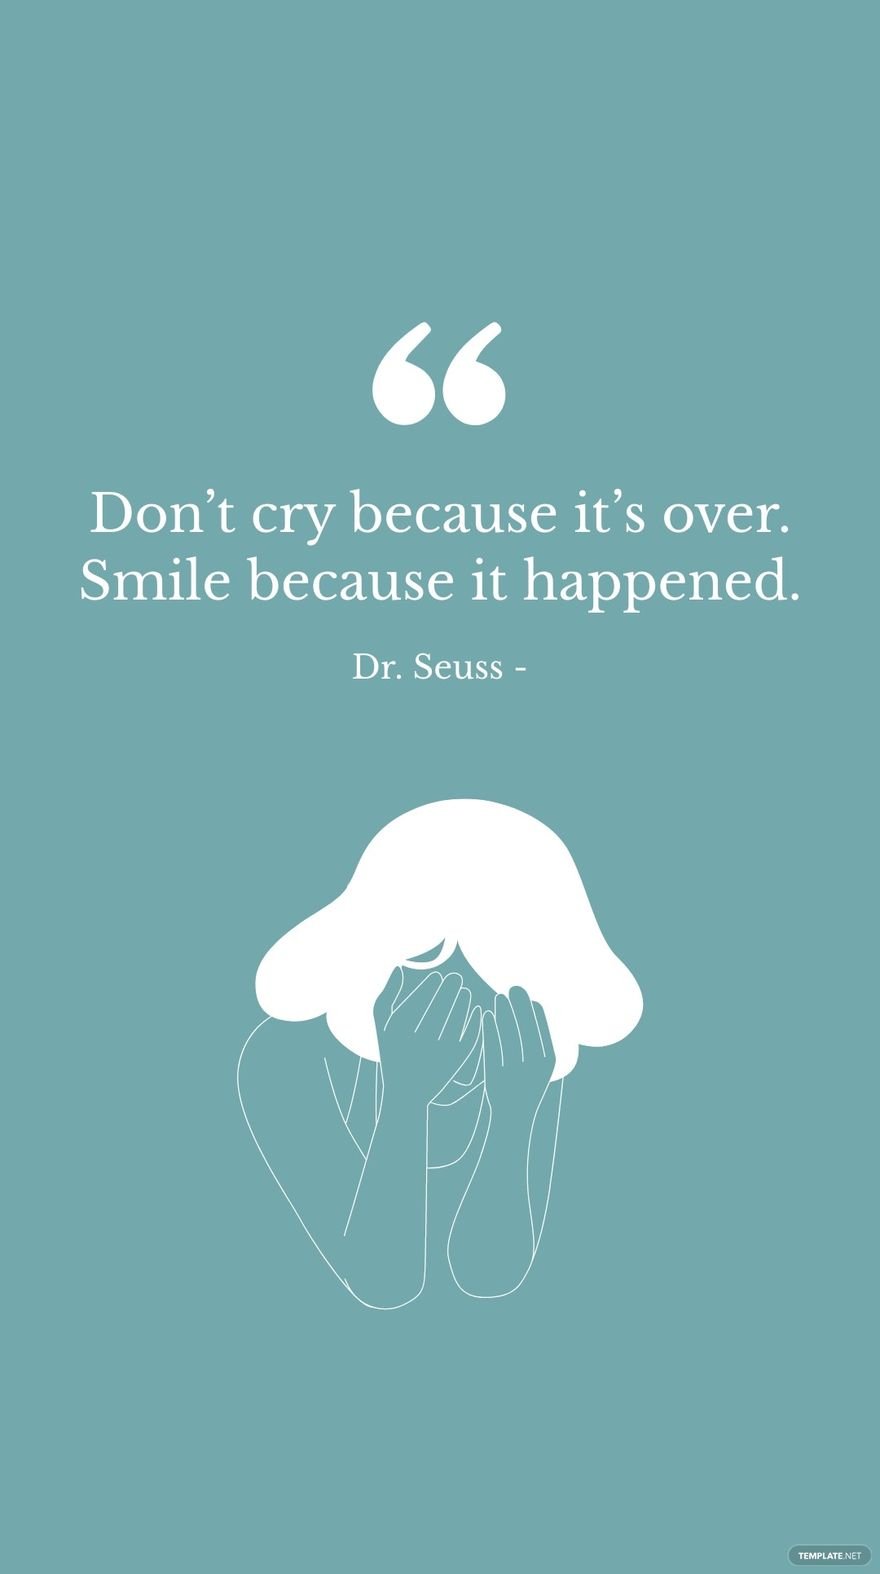 Dr. Seuss - Don’t cry because it’s over. Smile because it happened.